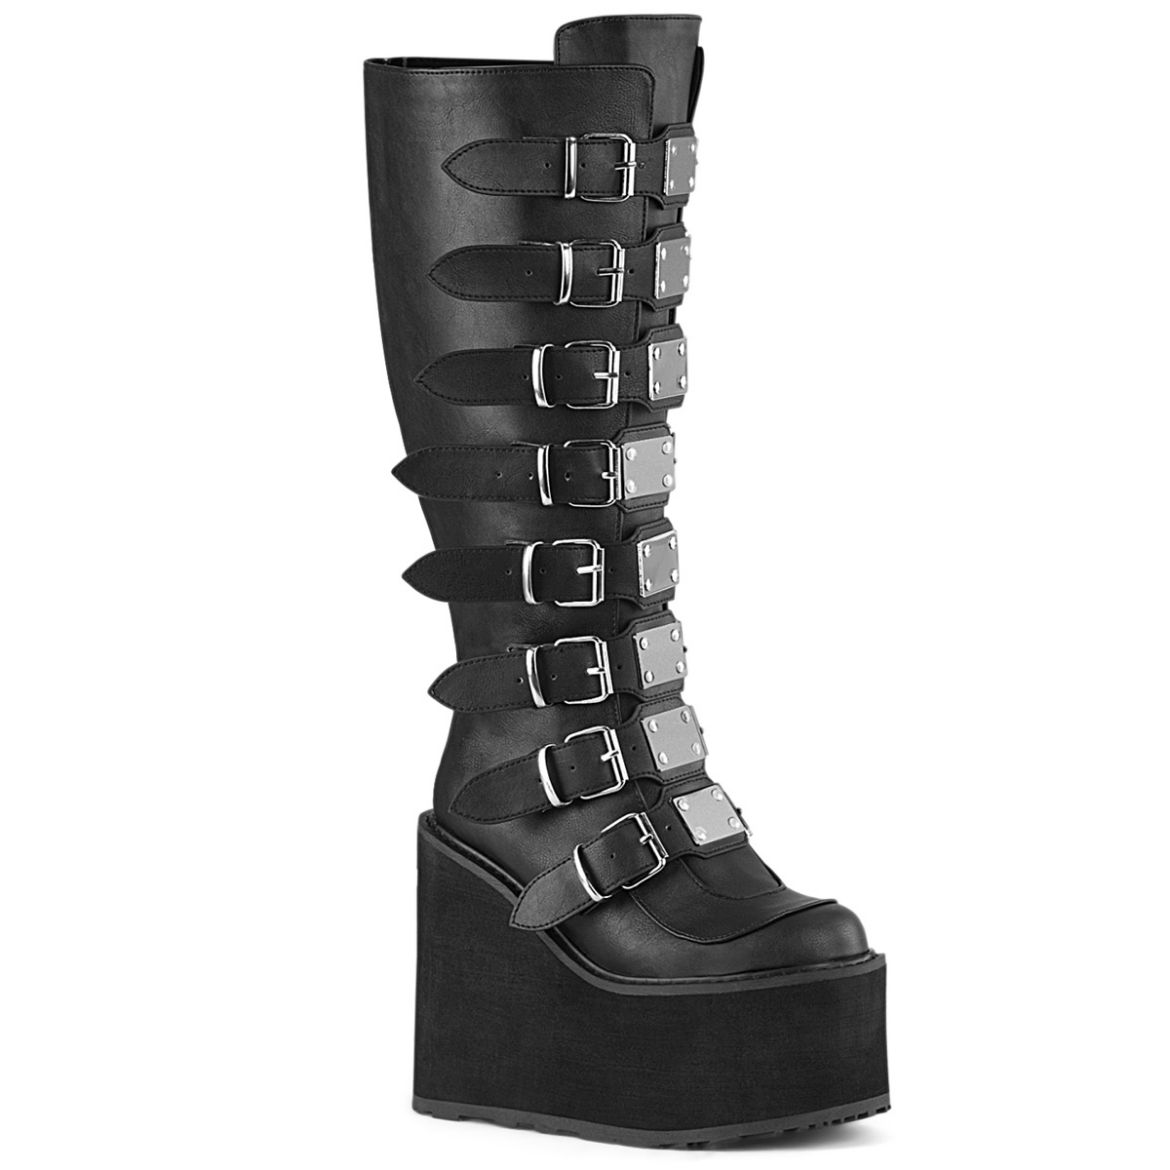 Product image of Demonia SWING-815WC Blk Vegan Leather 5 1/2 Inch PF Wide Calf Knee Boot w/ Buckle Straps Back Zip